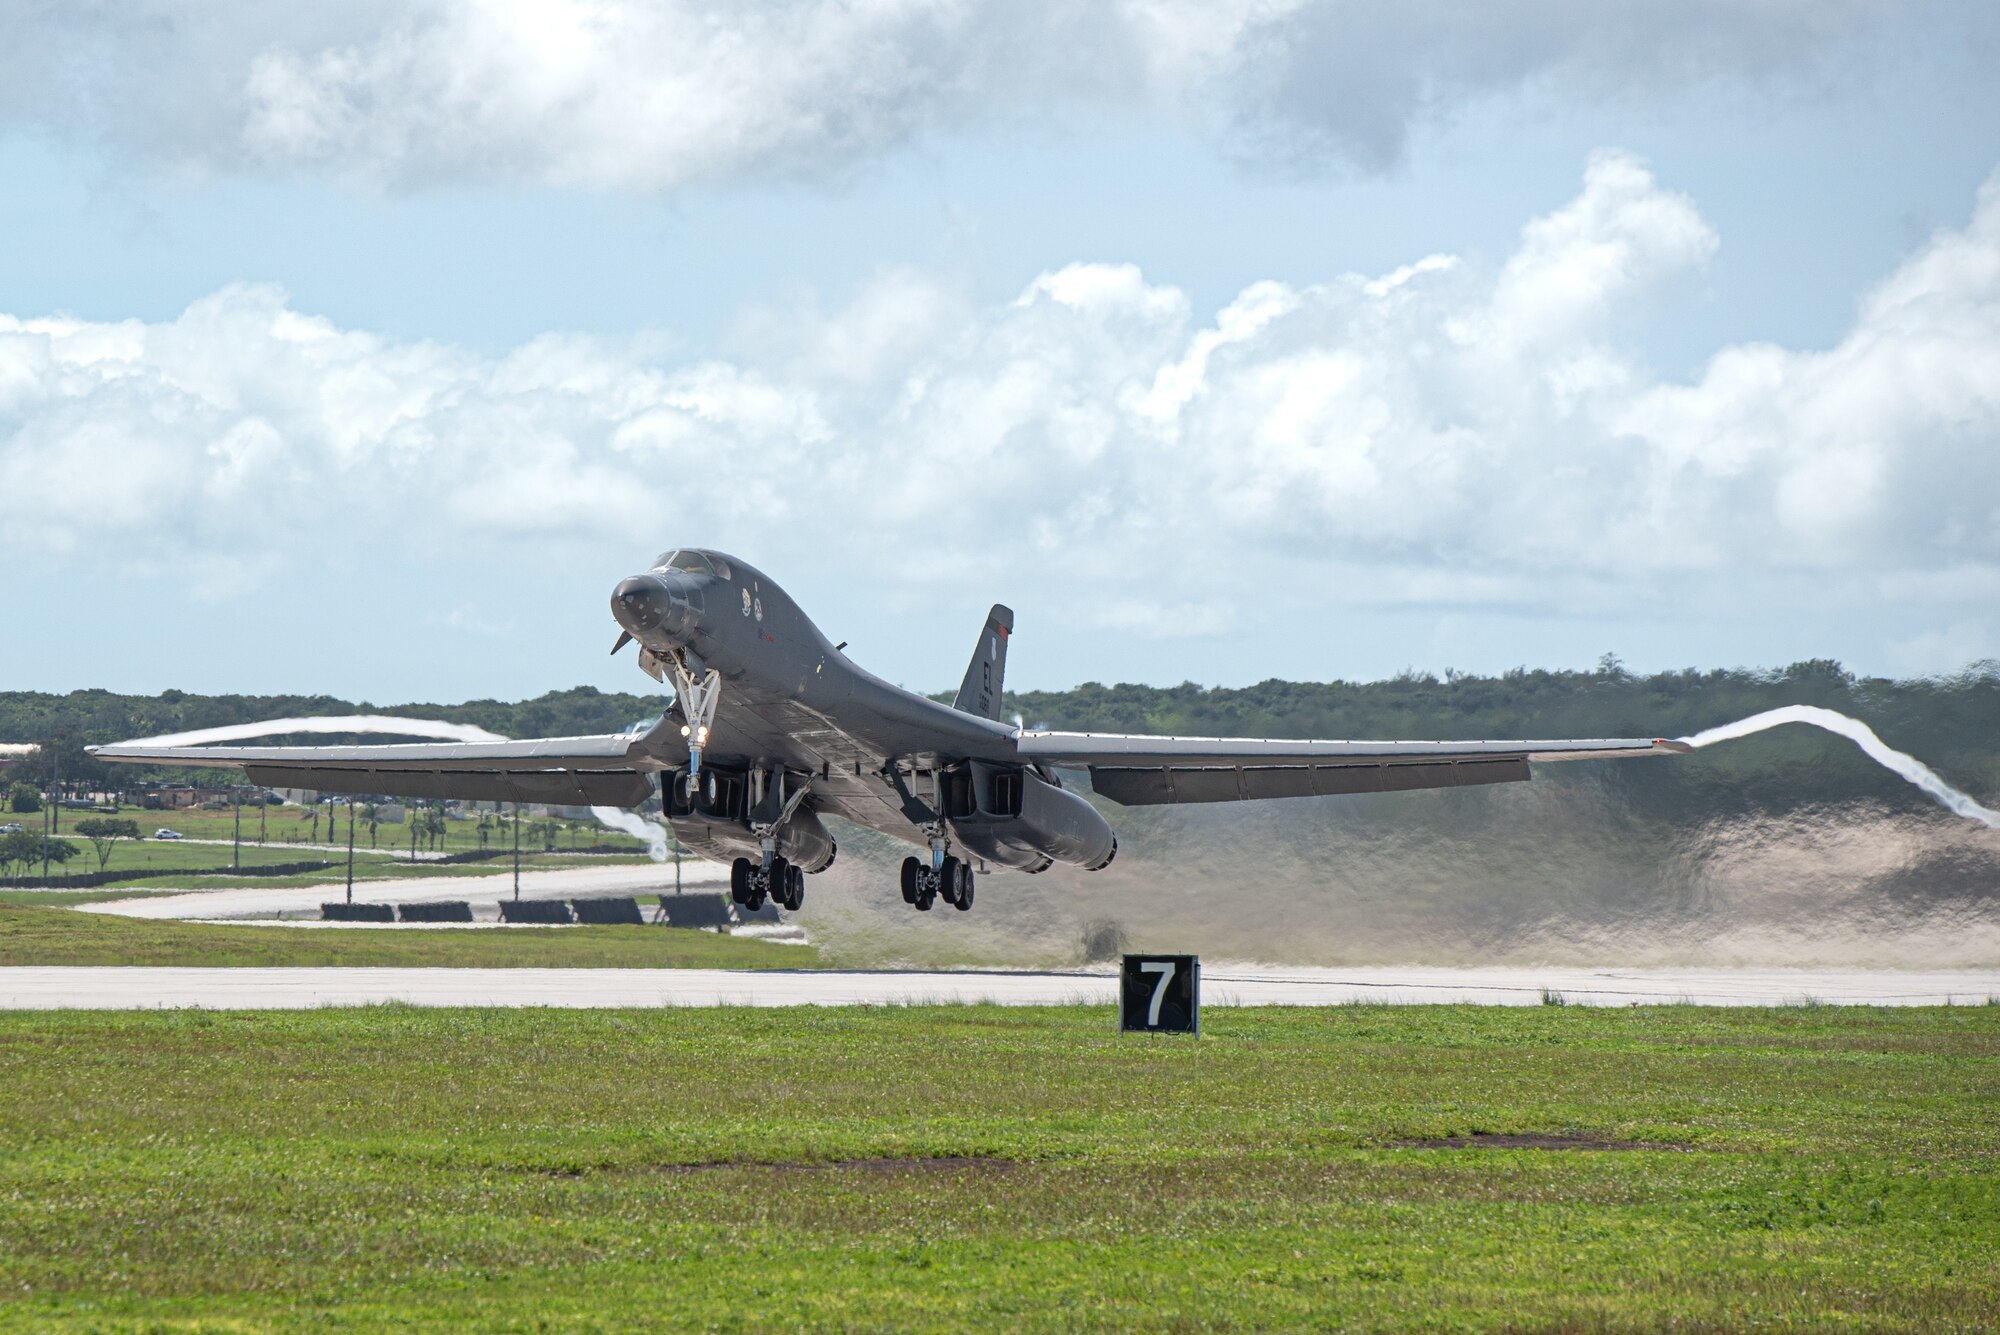 A U.S. Air Force B-1B Lancer assigned to the 37th Expeditionary Bomb Squadron, Ellsworth Air Force Base, South Dakota, takes off in support of a Bomber Task Force mission at Andersen AFB, Guam, Nov. 5, 2022. BTF missions contribute to joint force lethality and deter aggression in the Indo-Pacific by demonstrating the U.S. Air Force’s ability to operate anywhere in the world at any time in support of the National Defense Strategy. (U.S. Air Force photo by Senior Airman Yosselin Campos)